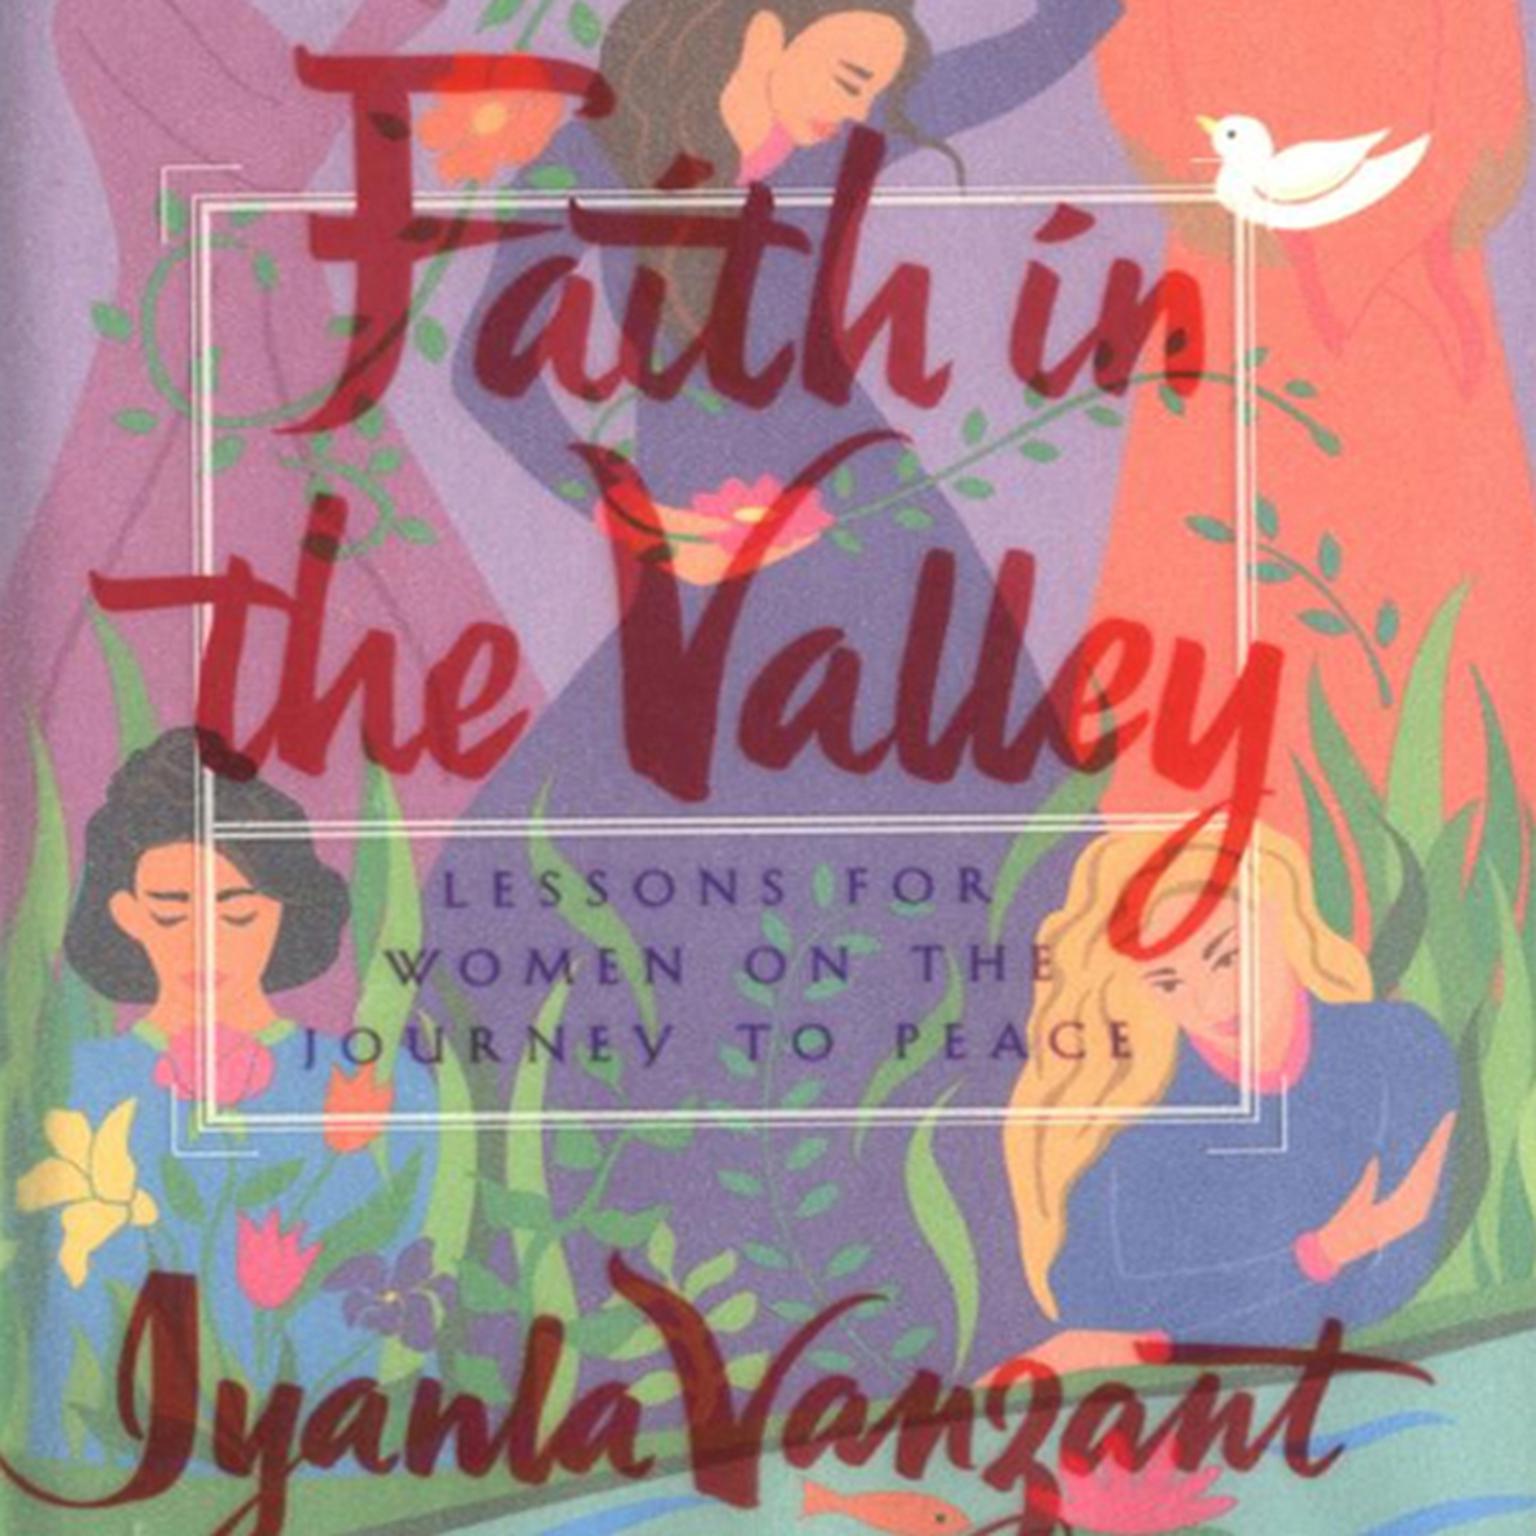 Faith In The Valley (Abridged): Lessons For Women On The Journey To Peace Audiobook, by Iyanla Vanzant